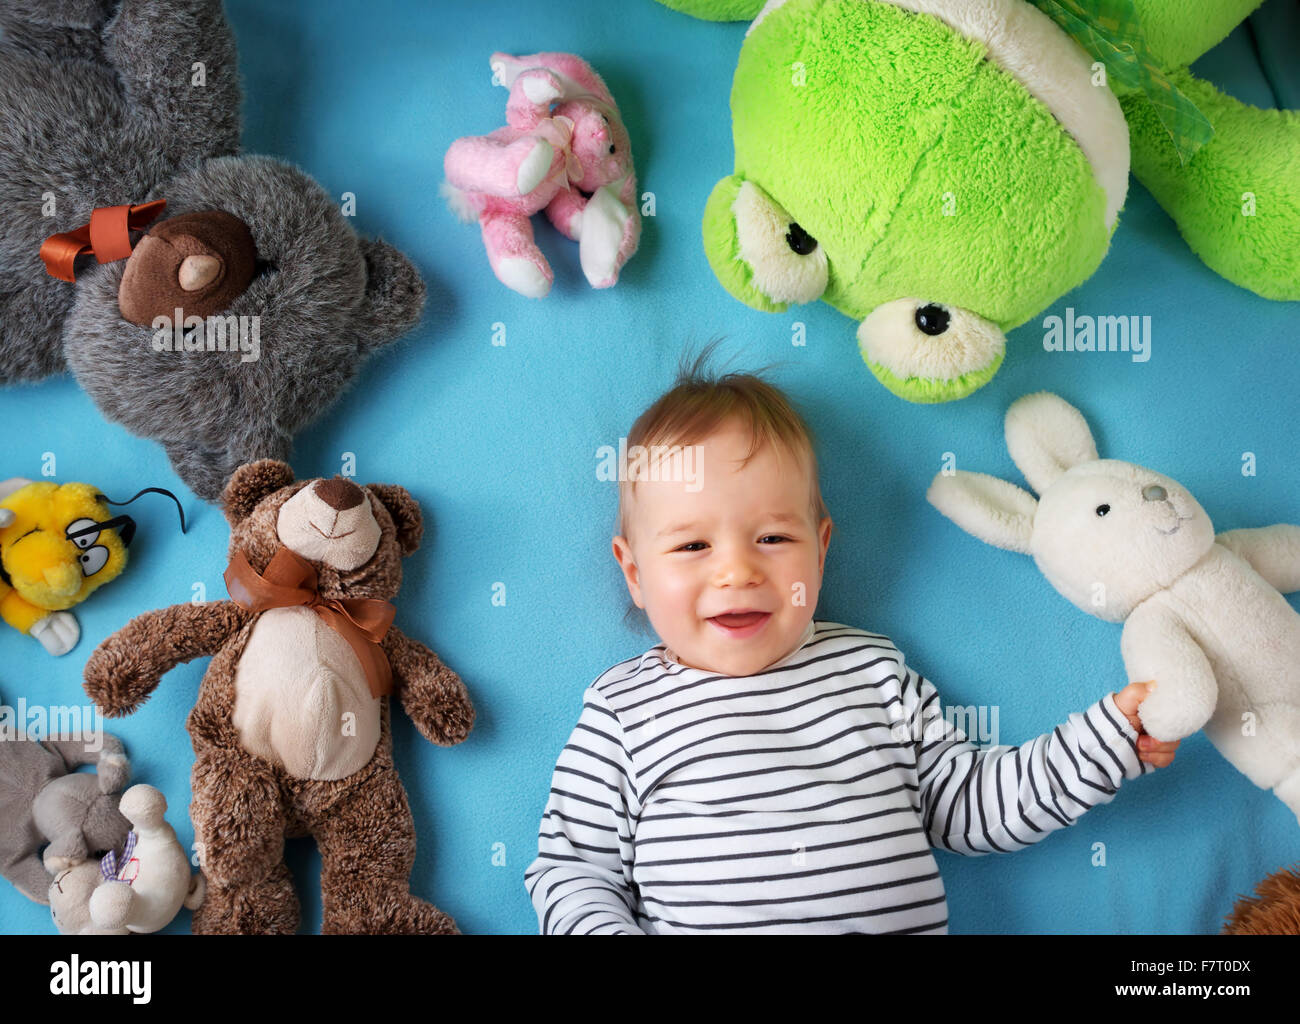 soft toys for 1 year old boy